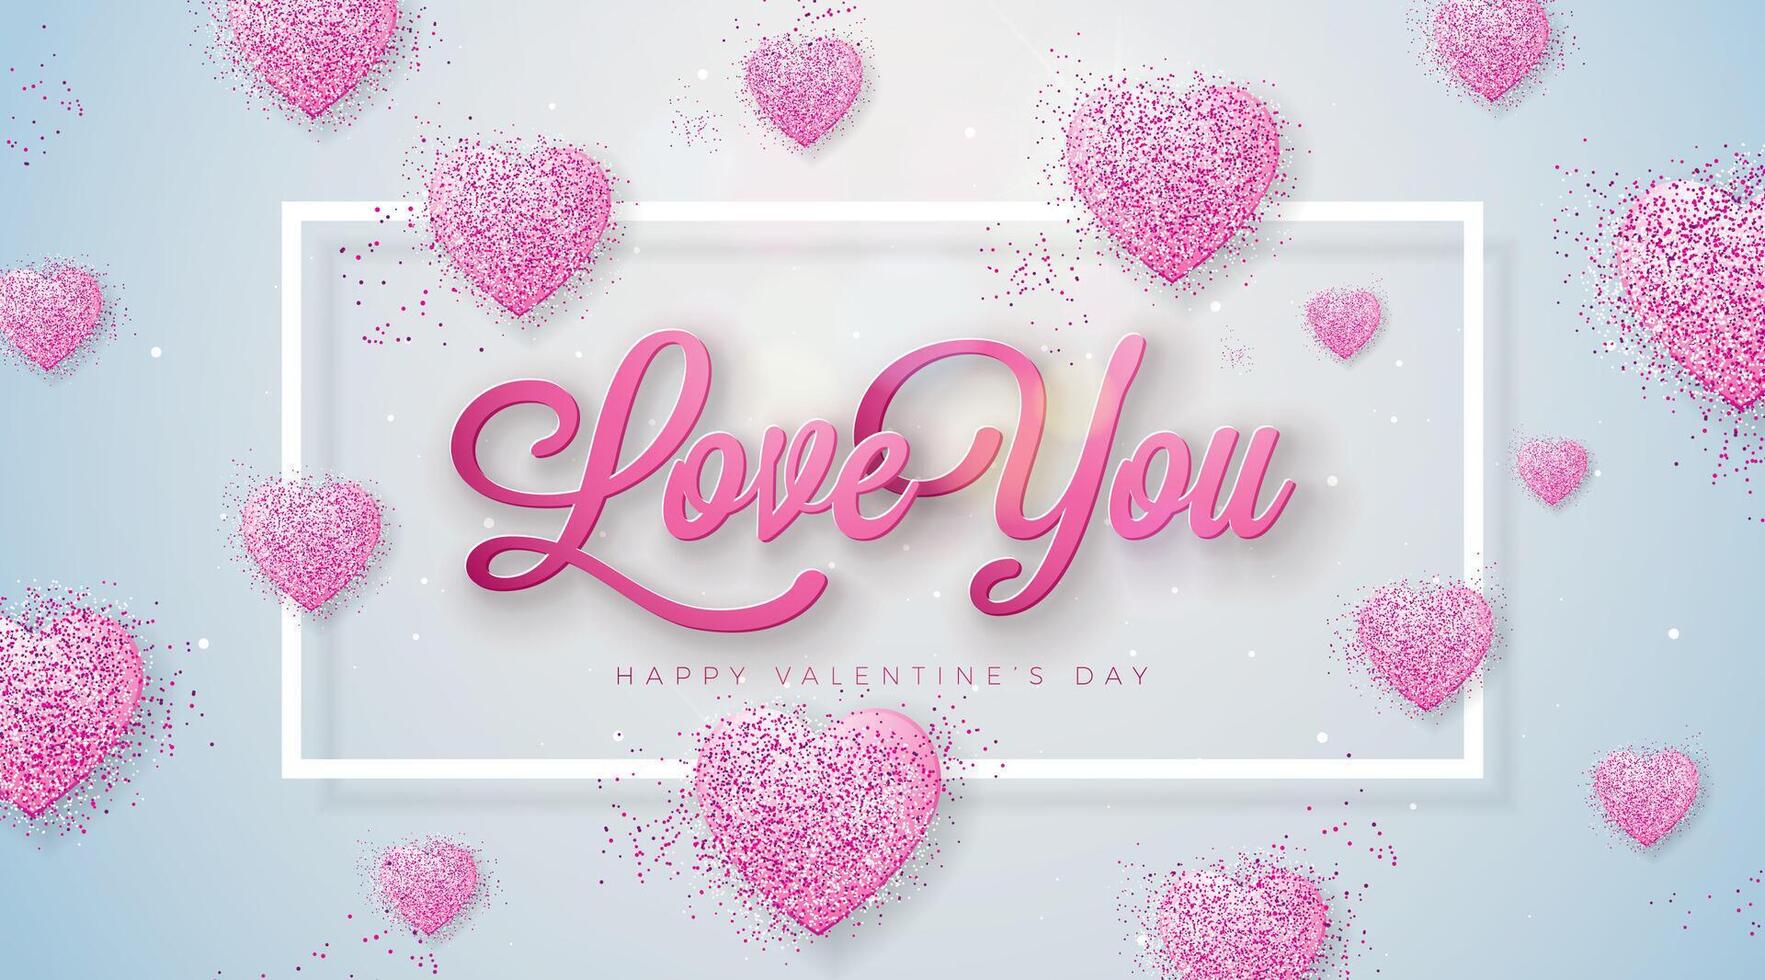 Love You. Happy Valentines Day Design with Glittered Heart and Typography Letter on Shiny Light Background. Vector Wedding and Romantic Valentine Theme Illustration for Flyer, Greeting Card, Banner,